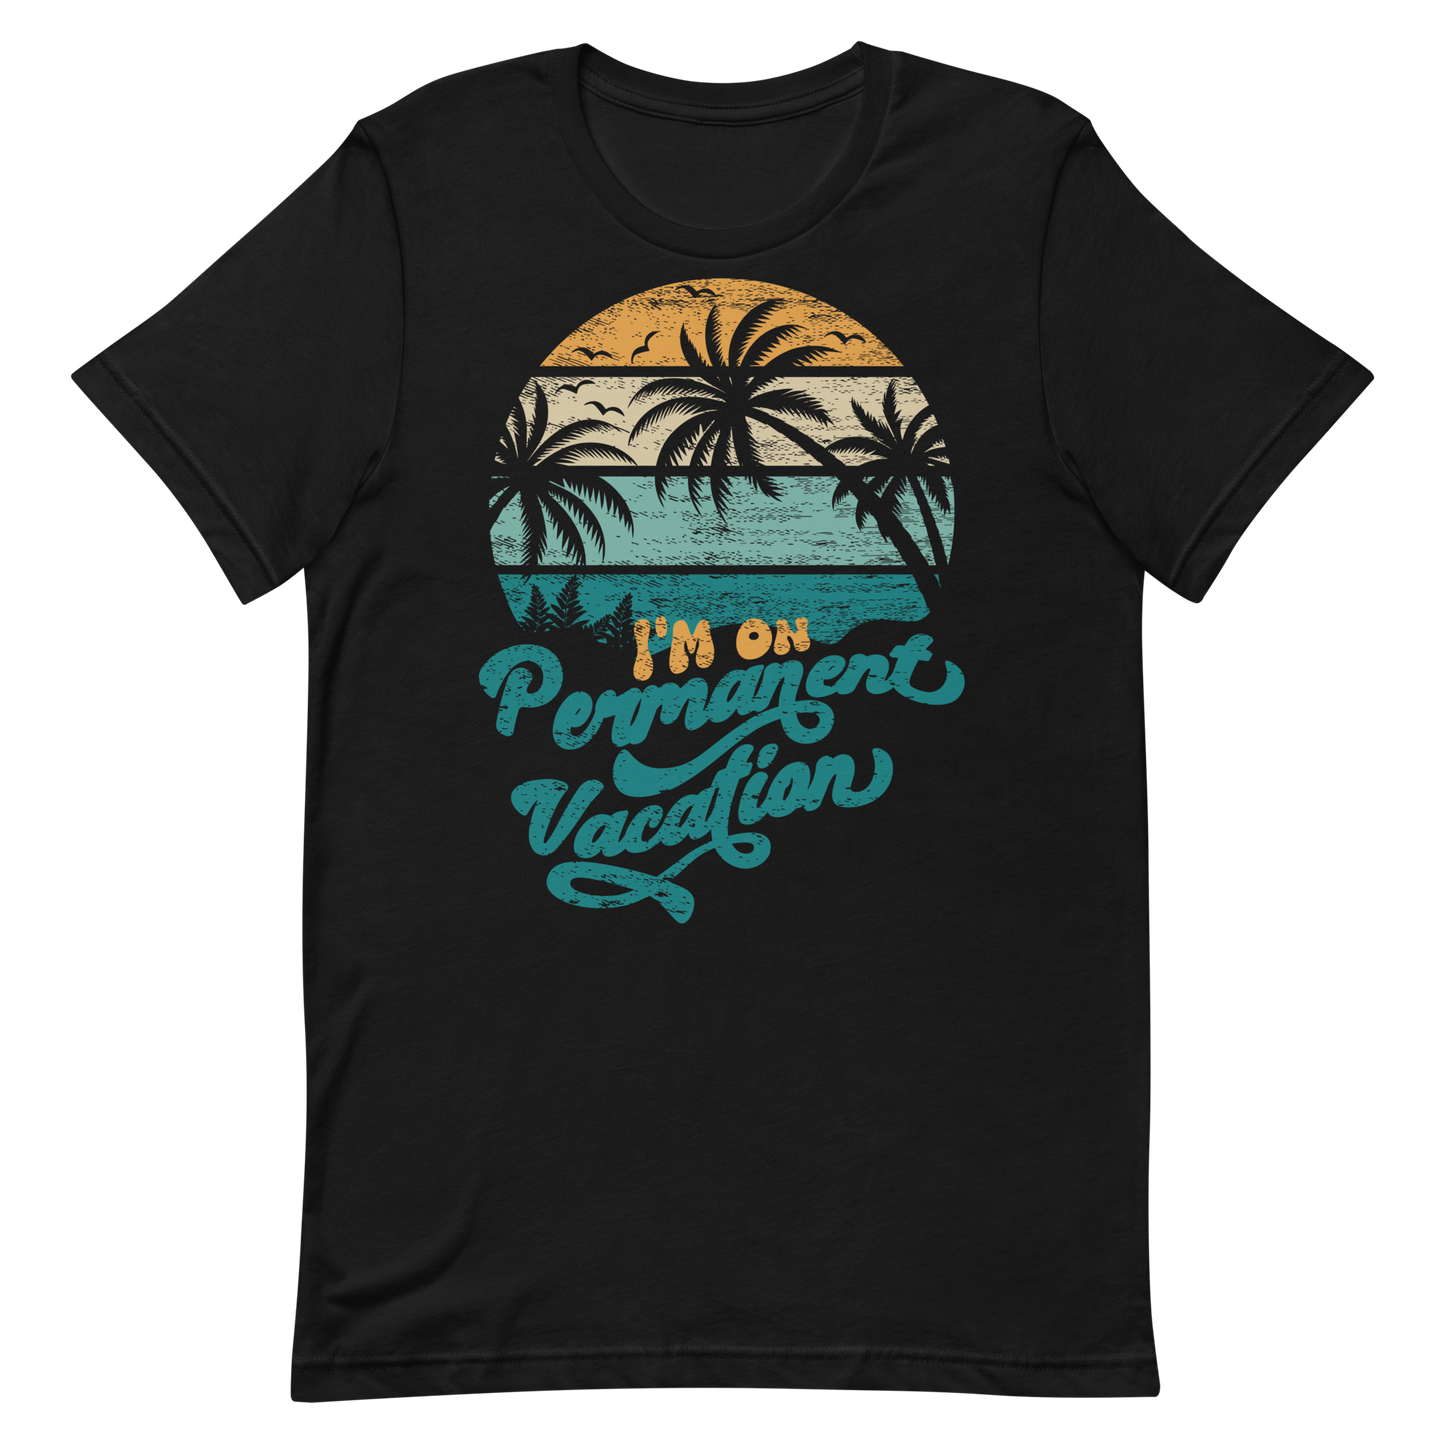 Retro Unisex T-Shirt - Palm Trees With a Retirement Quote Black